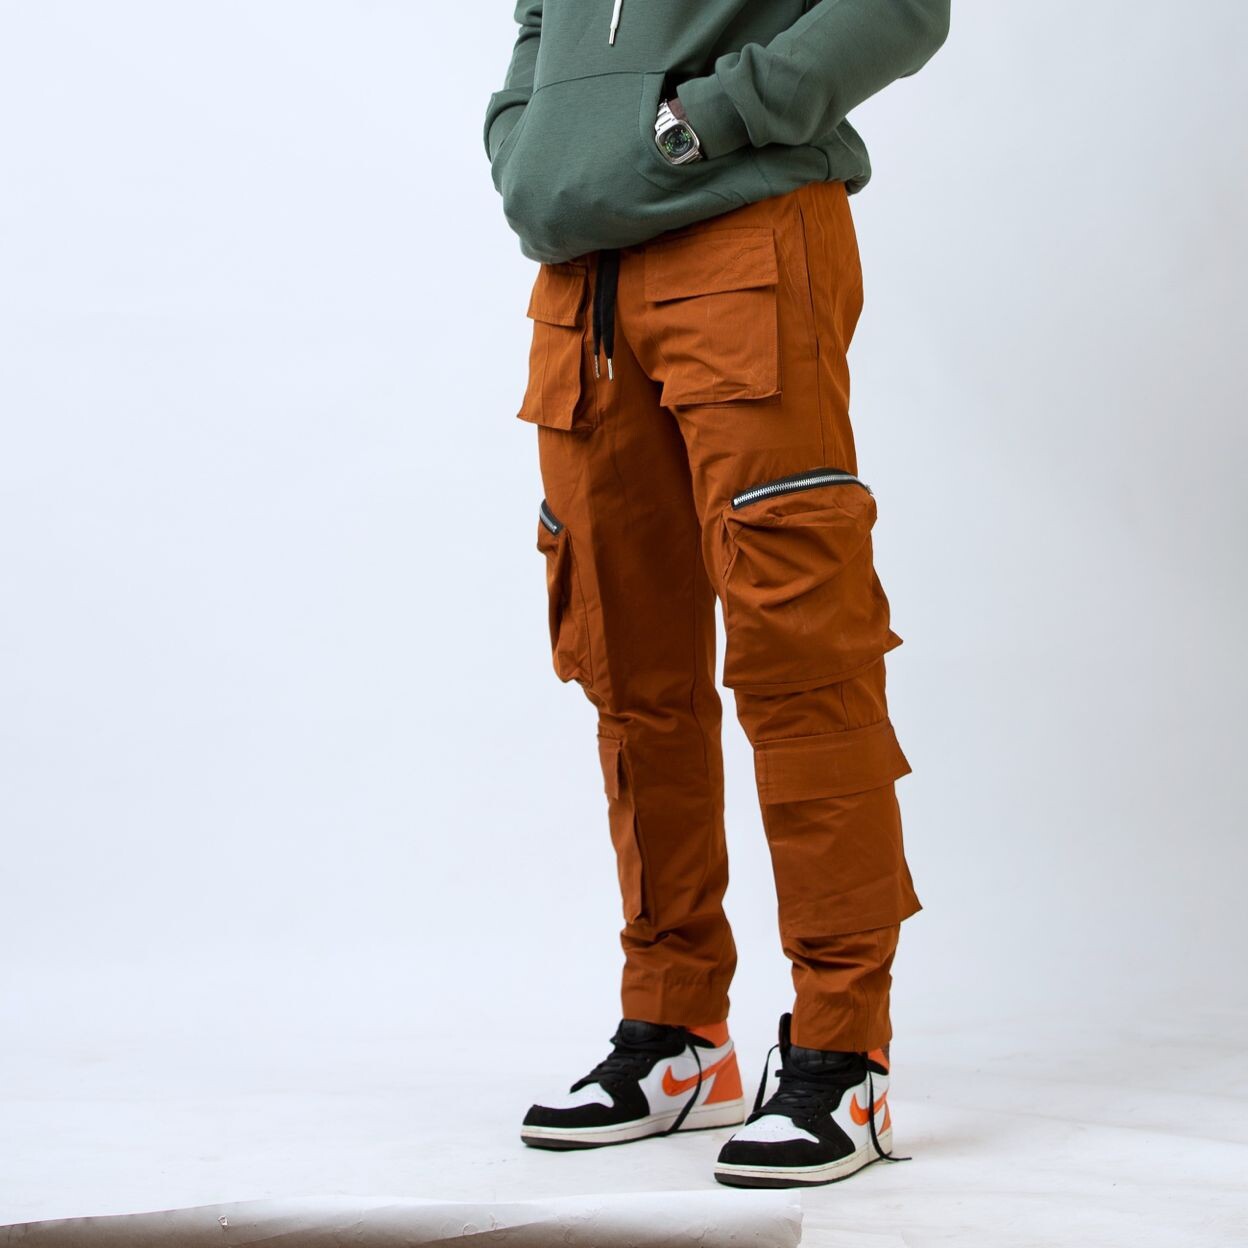 brown cargo pants outfit menTikTok Search